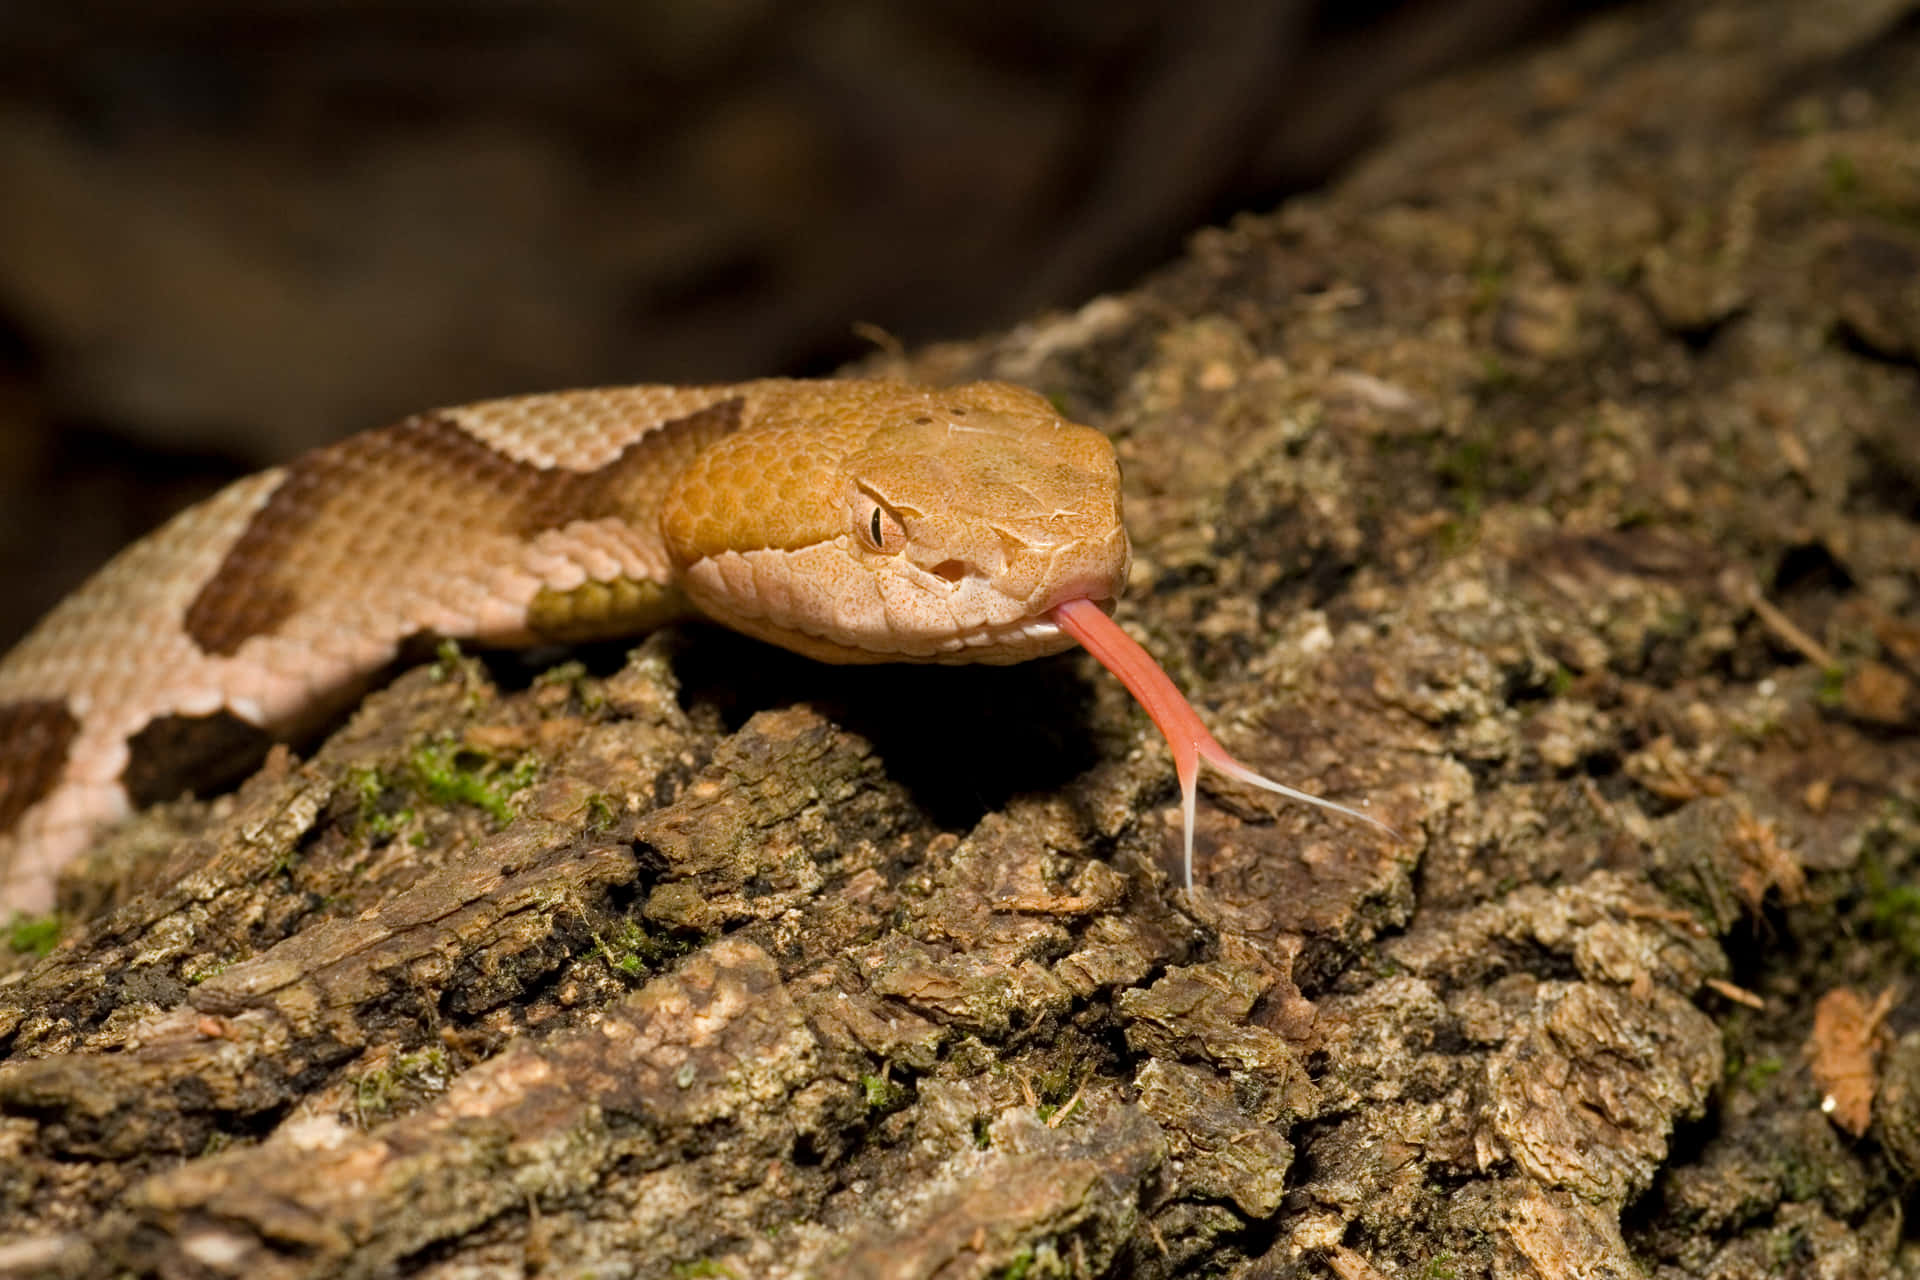 A Copperhead Snake Lurks in the Woodlands